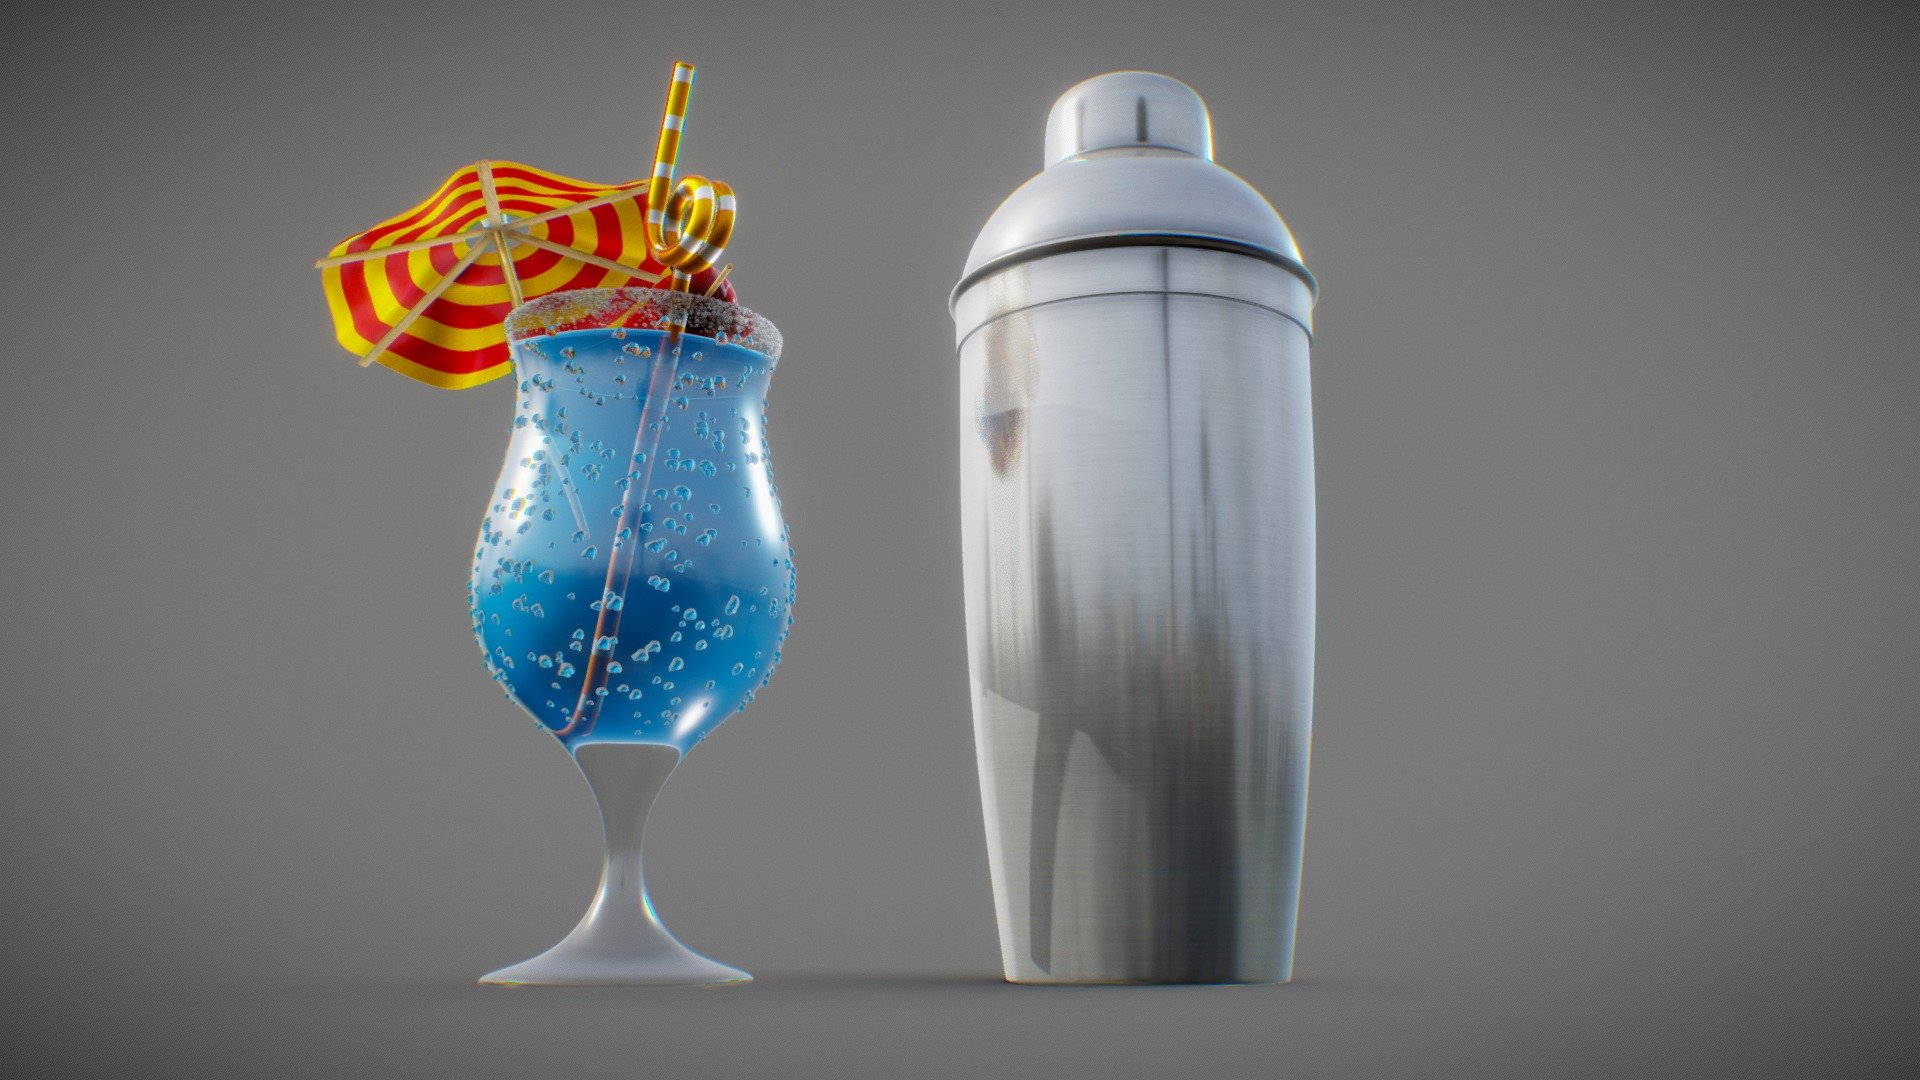 HiPoly model.
Tropical drink with shaker. Glass is covered with drops of water and a rim of sugar particles on top. 
Inside there are ice cubes, straw. umbrella and sweet cherries - HiPoly: Tropical drink with shaker - Buy Royalty Free 3D model by MarcinGArt (@marcin.gk) 3d model